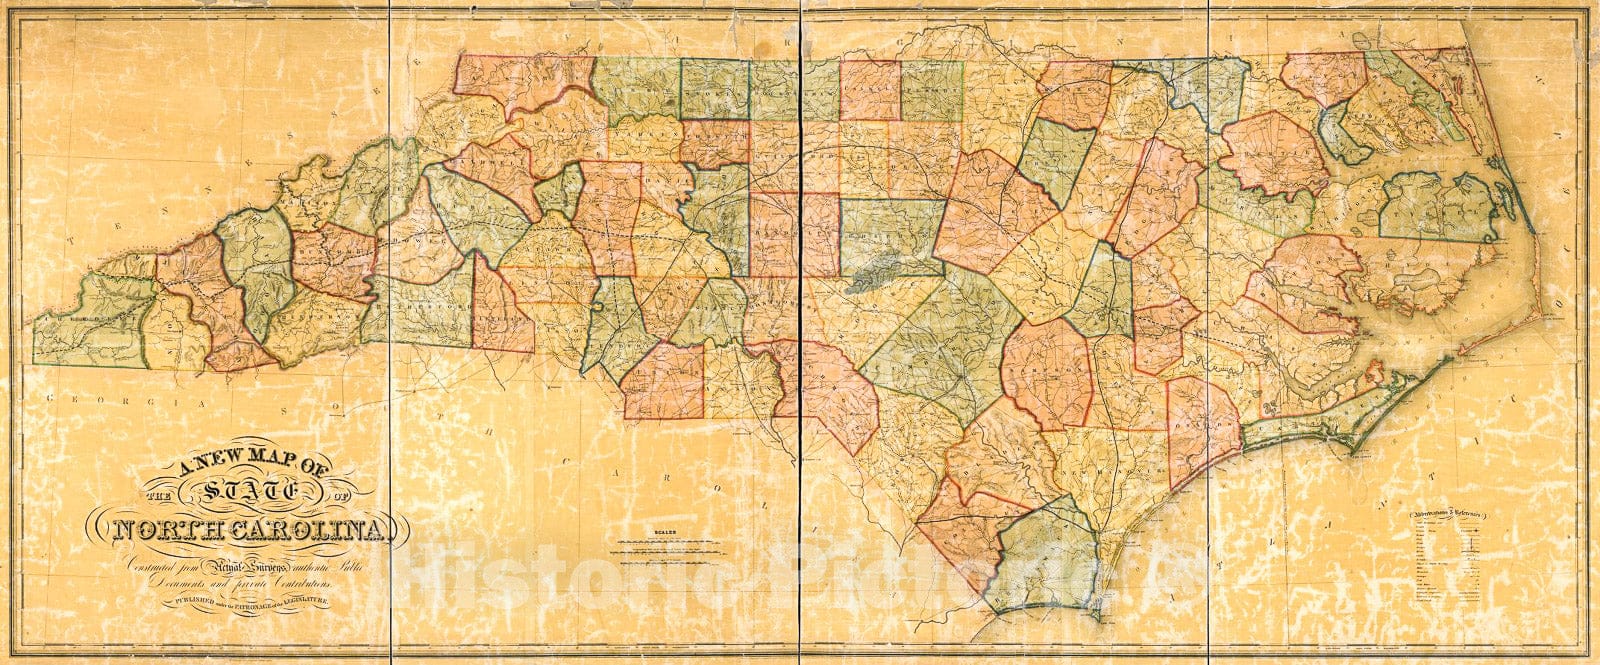 Historic 1854 Map - A New map of The State of North Carolina : Constructed from Actual surveys, Authentic Public documents and Private contributions.